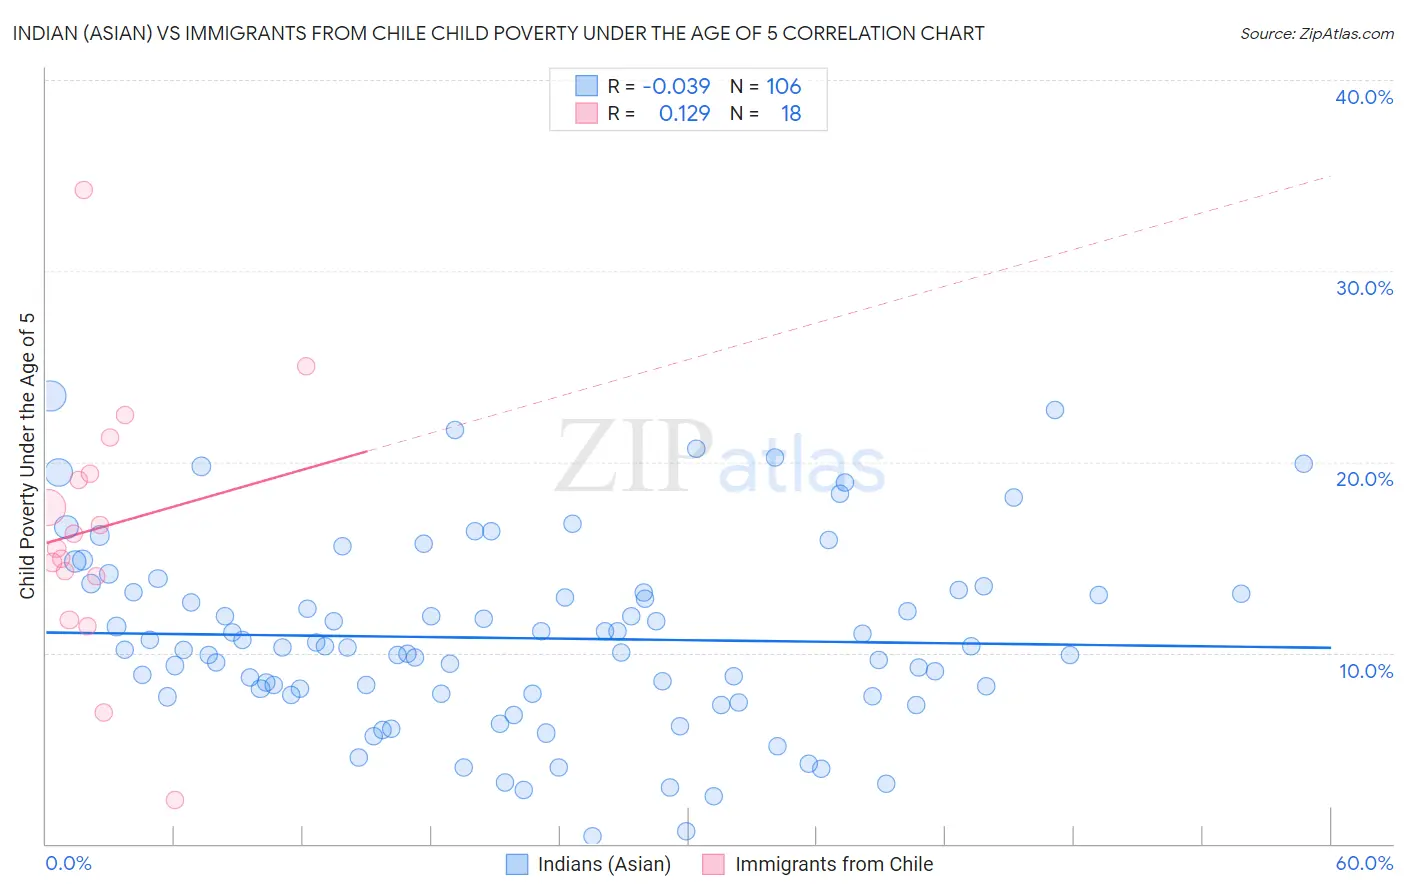 Indian (Asian) vs Immigrants from Chile Child Poverty Under the Age of 5